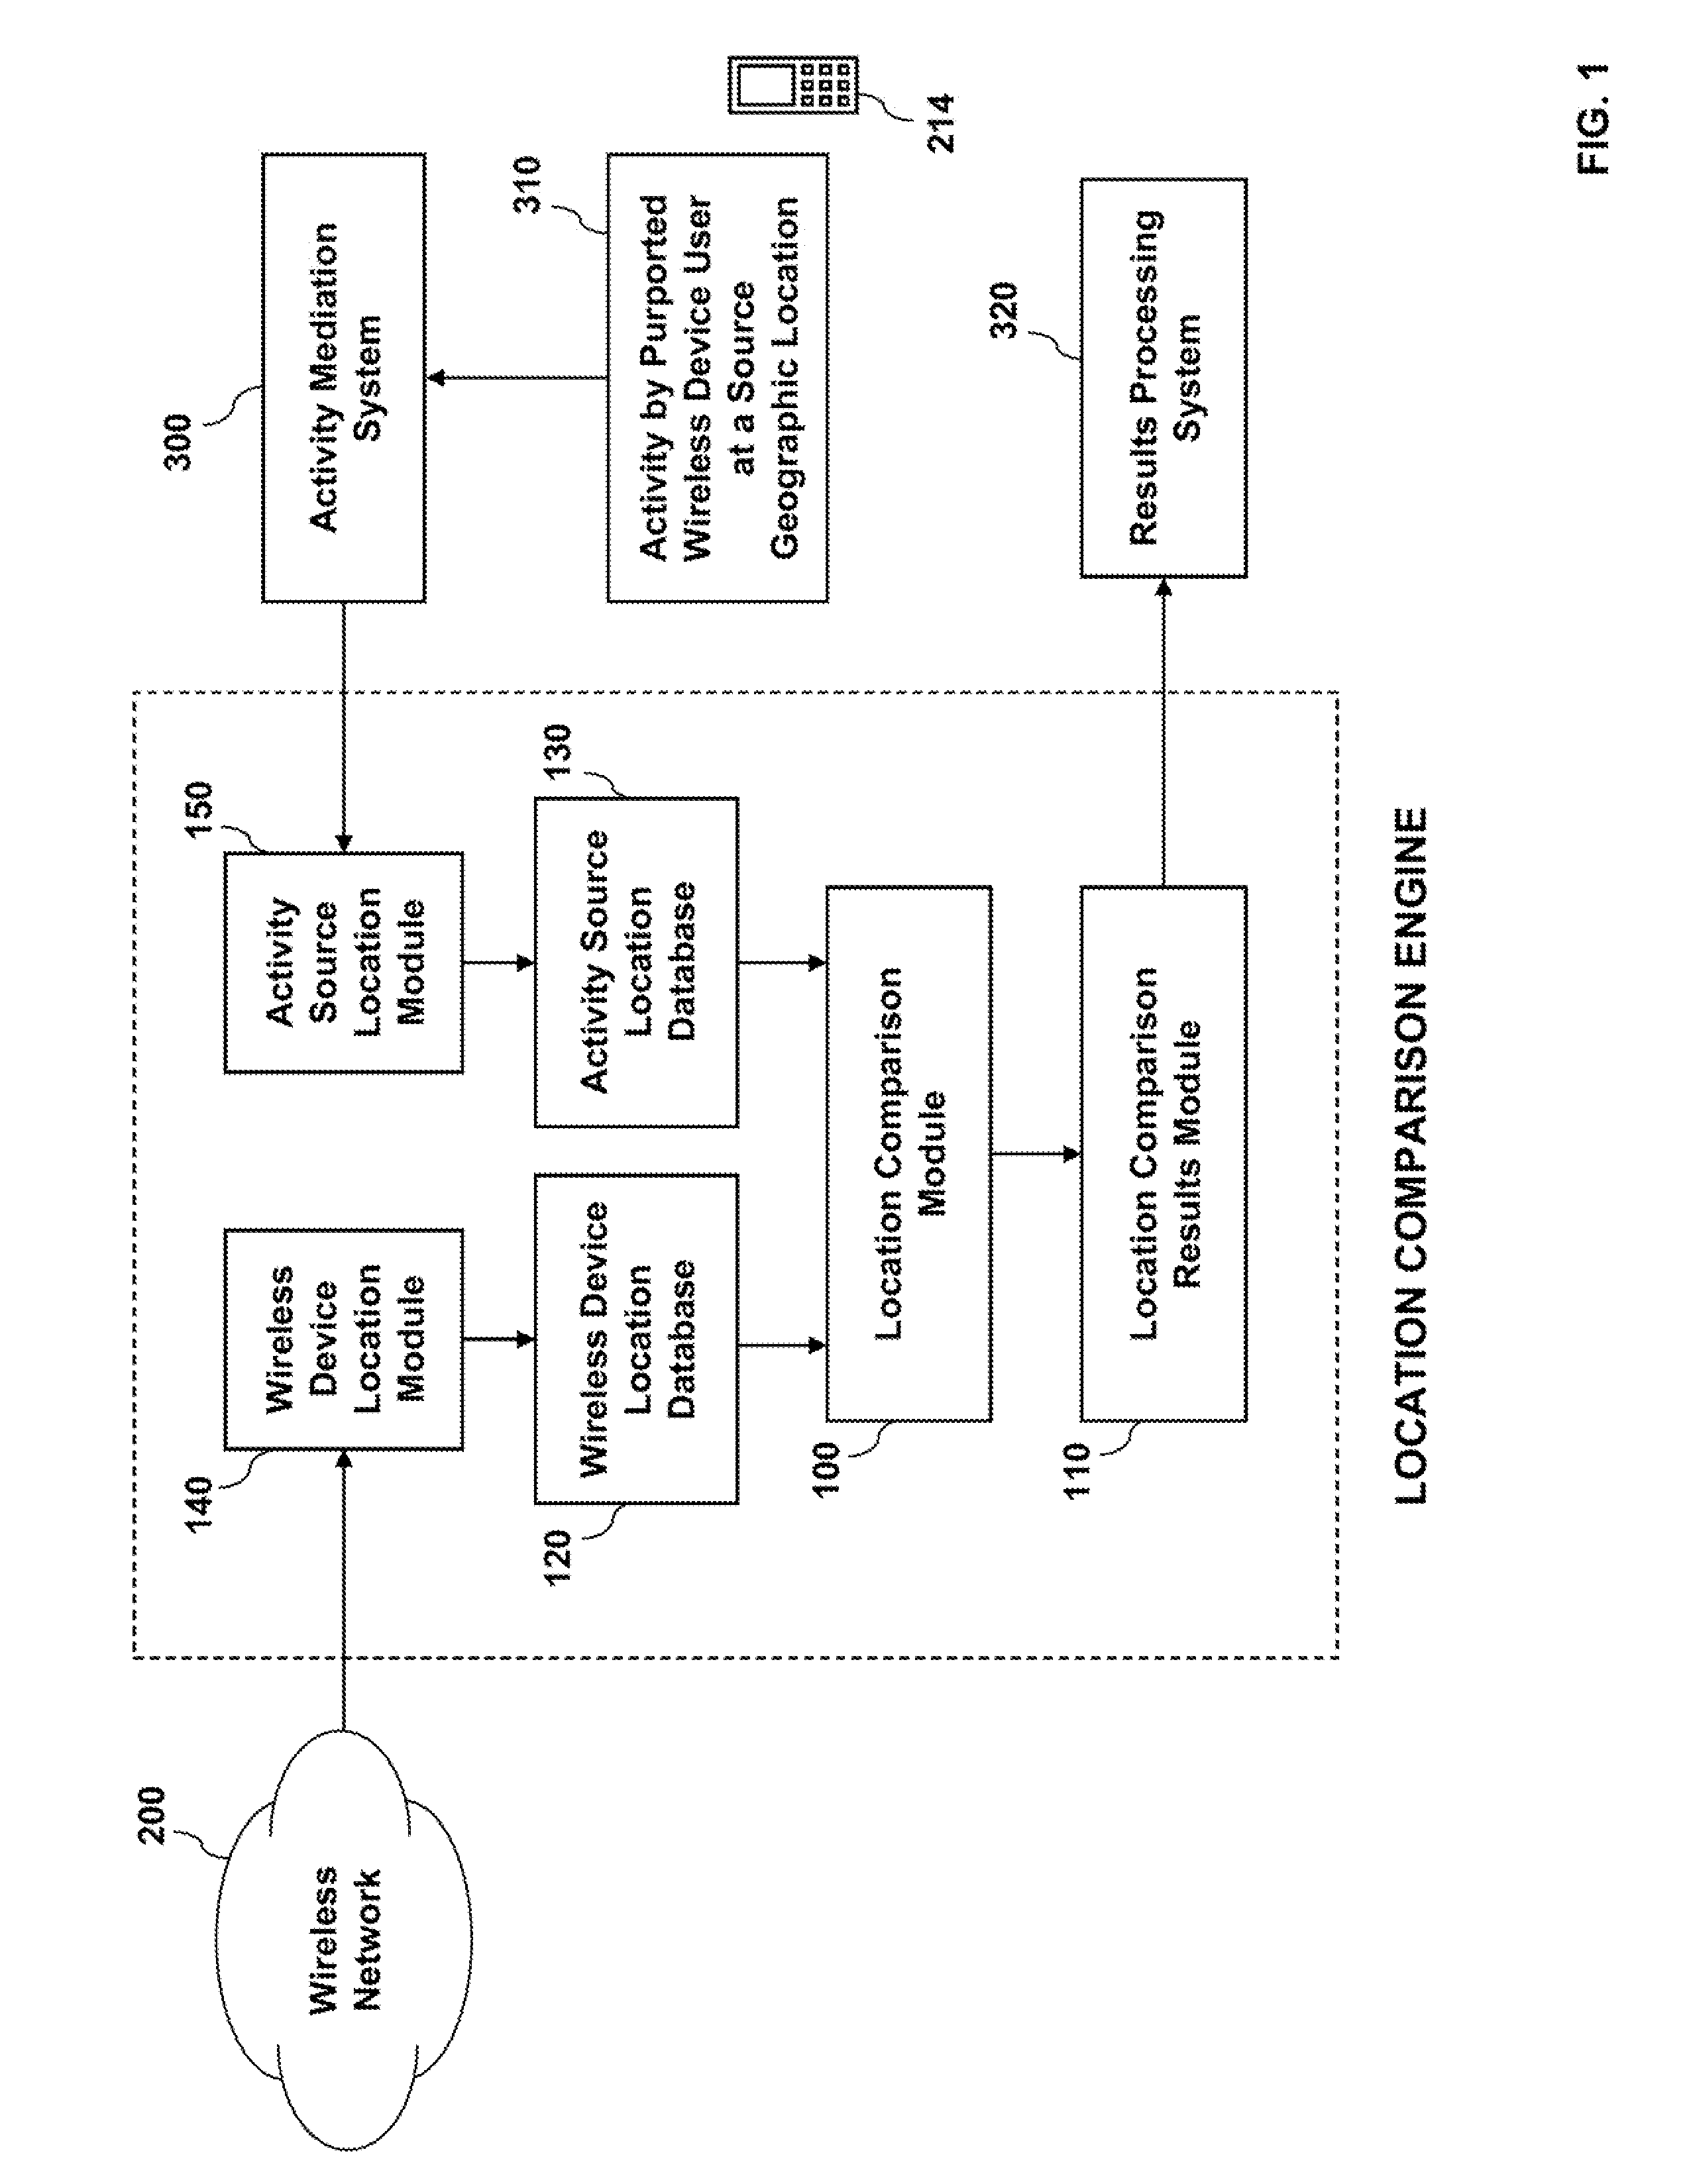 System and method for automated analysis comparing a wireless device location with another geographic location